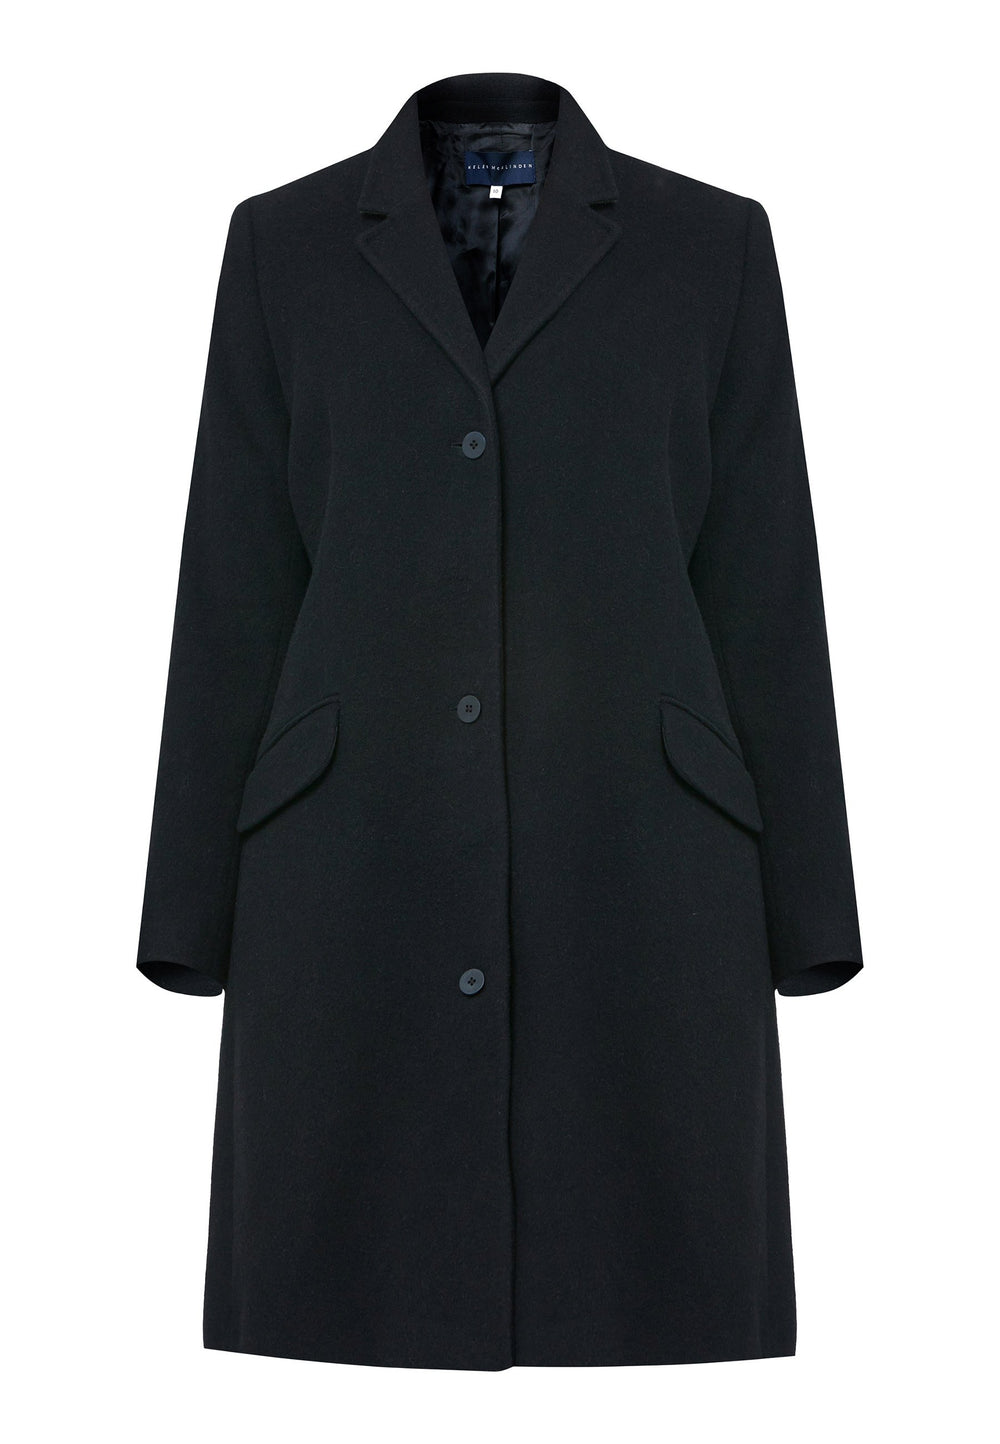 Introducing the Leighton Black Coat, a stylish and sophisticated wardrobe investment. Crafted from a wool and cashmere blend melton, this knee-length coat offers both warmth and style. Inspired by refined men's tailoring, it features a tidy collar and revere. The coat also boasts a striking bright green undercollar, adding a touch of uniqueness and visual interest.